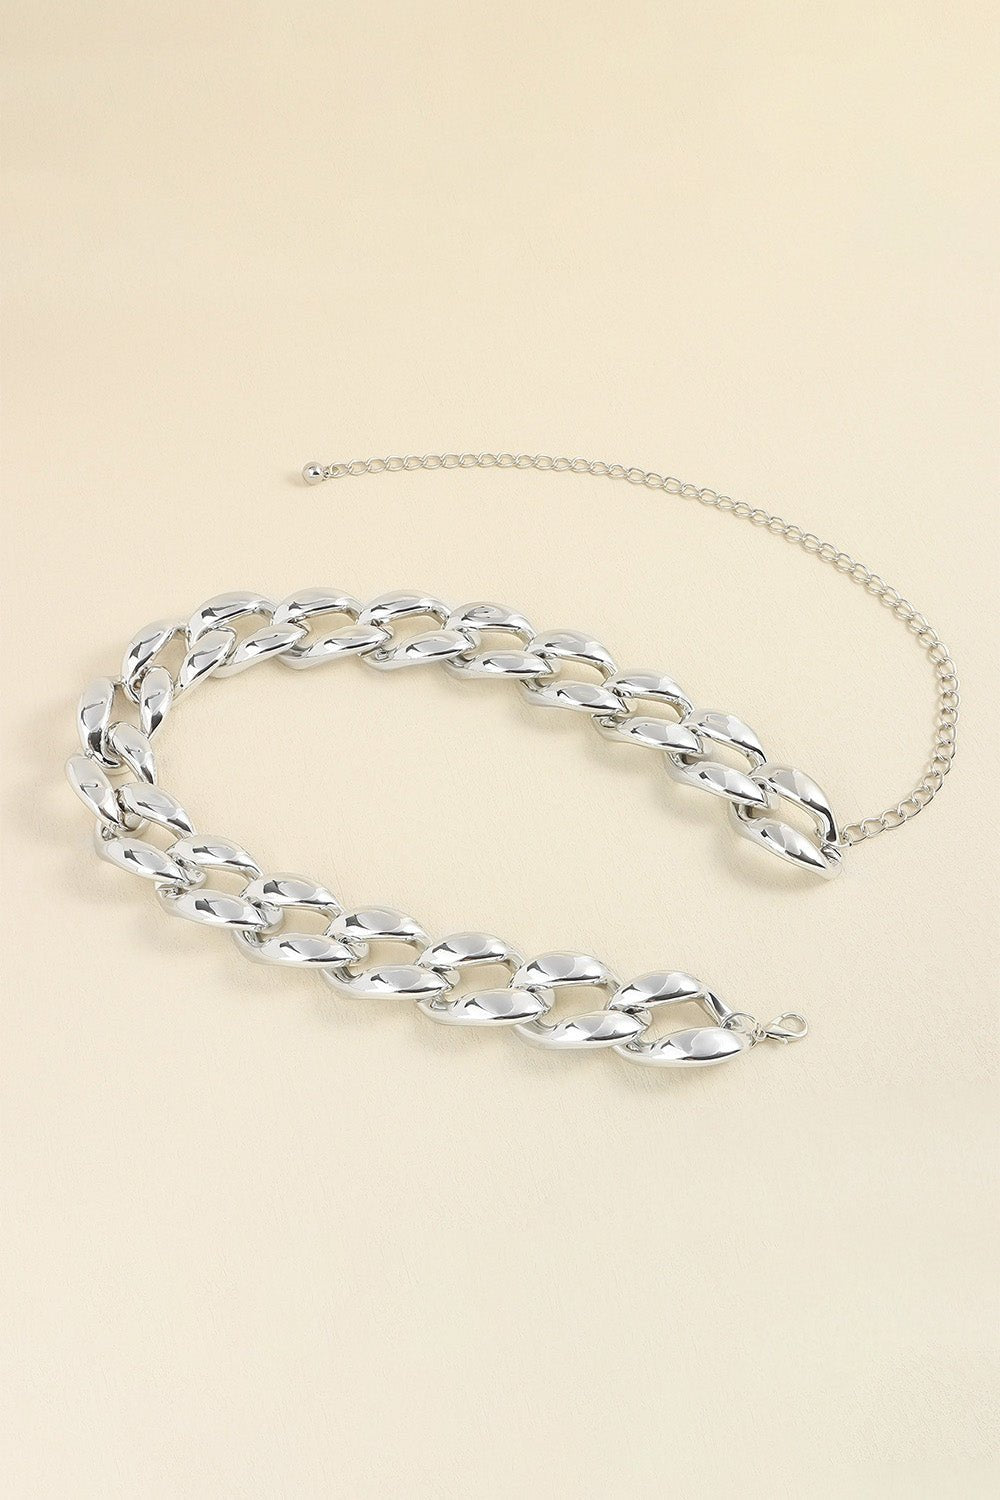 1.2" Width Acrylic Curb Chain Belt - Uylee's Boutique